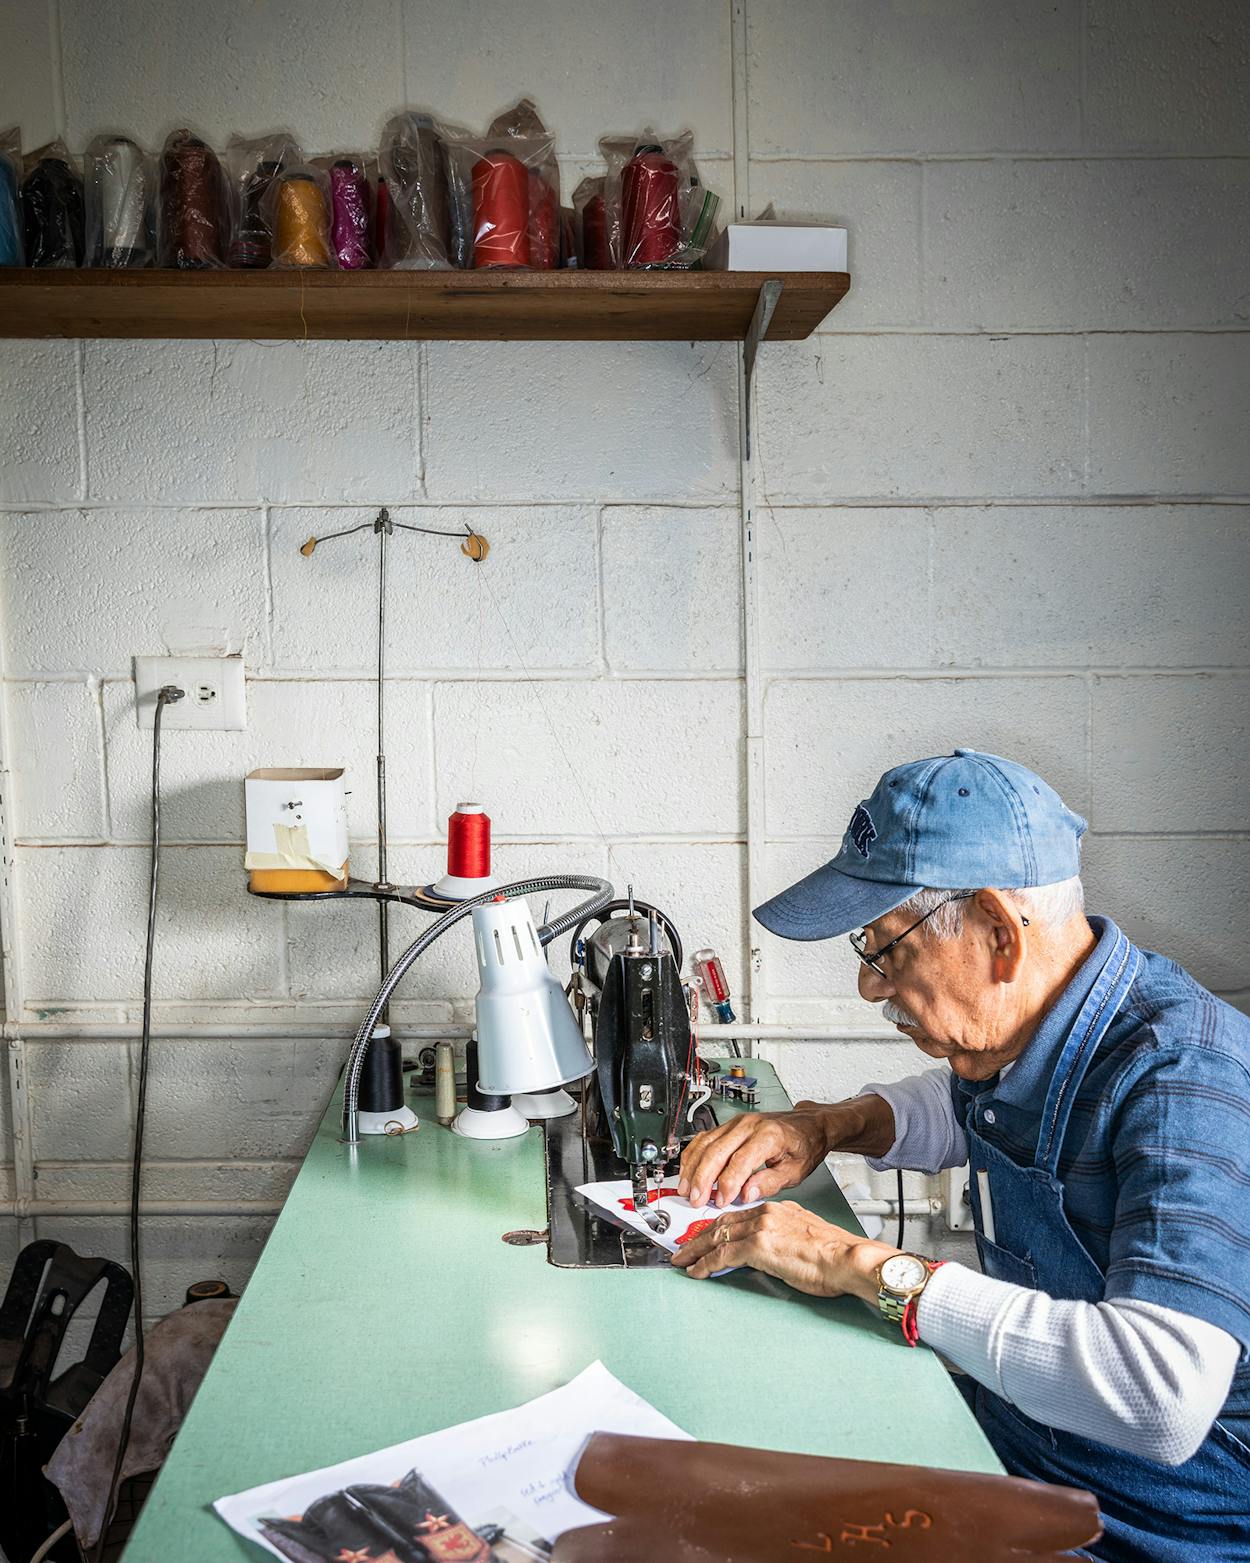 Juan O. Ortiz, who has worked at Little’s for 33 years, mans a classic Singer 31-15 sewing machine, stitching inlays that will decorate a boot’s shaft.